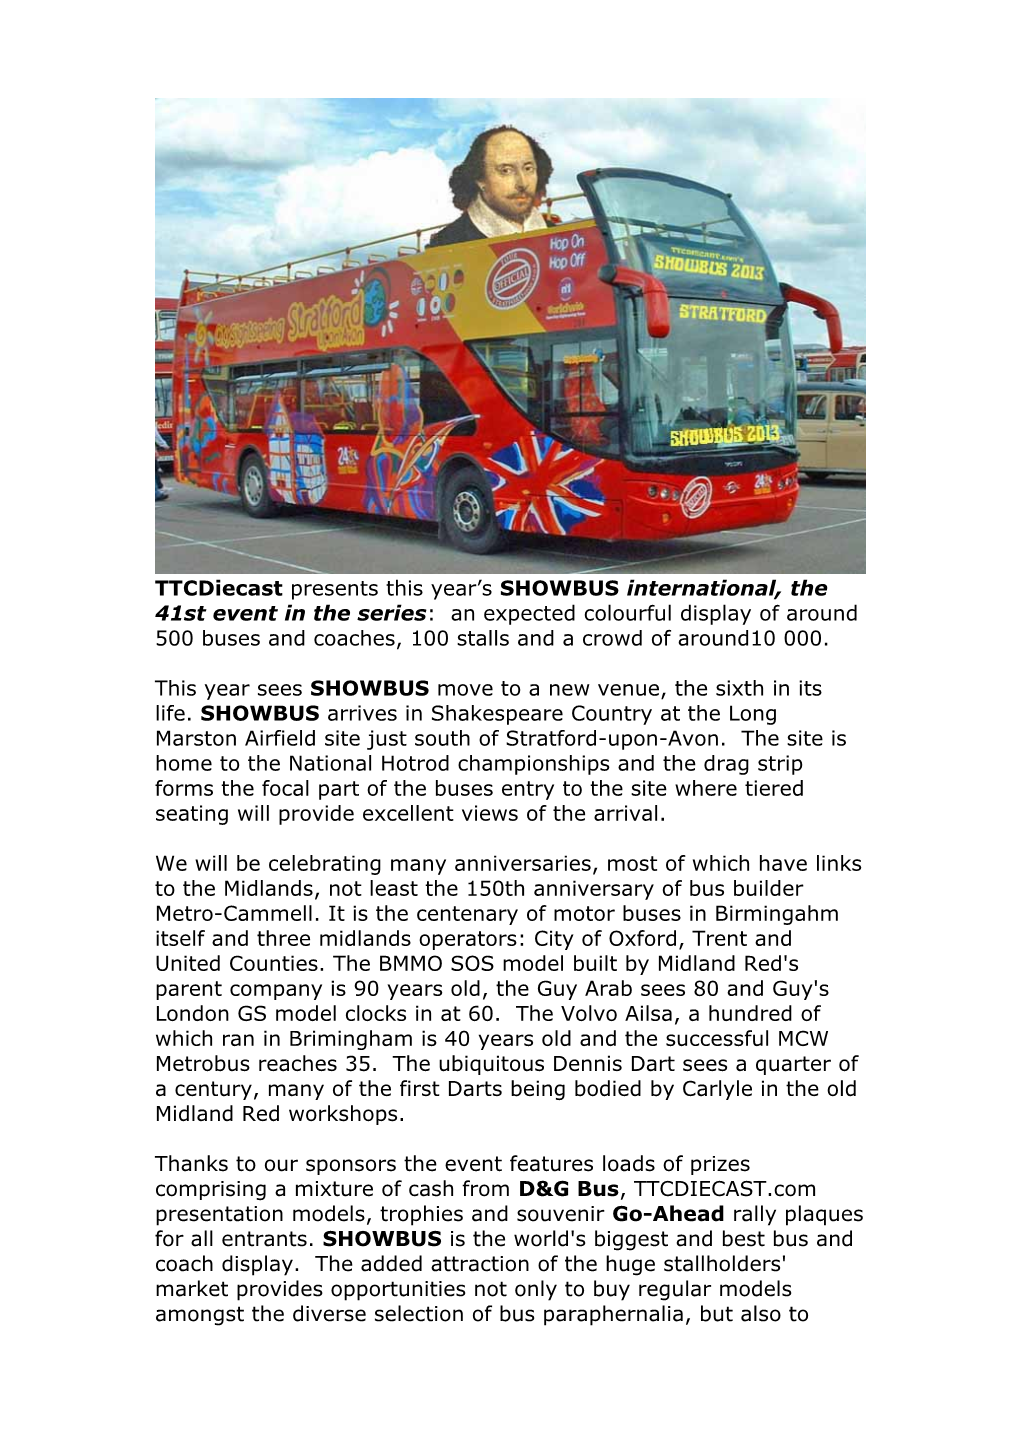 Ttcdiecast Presents This Year S SHOWBUS International, the 41St Event in the Series